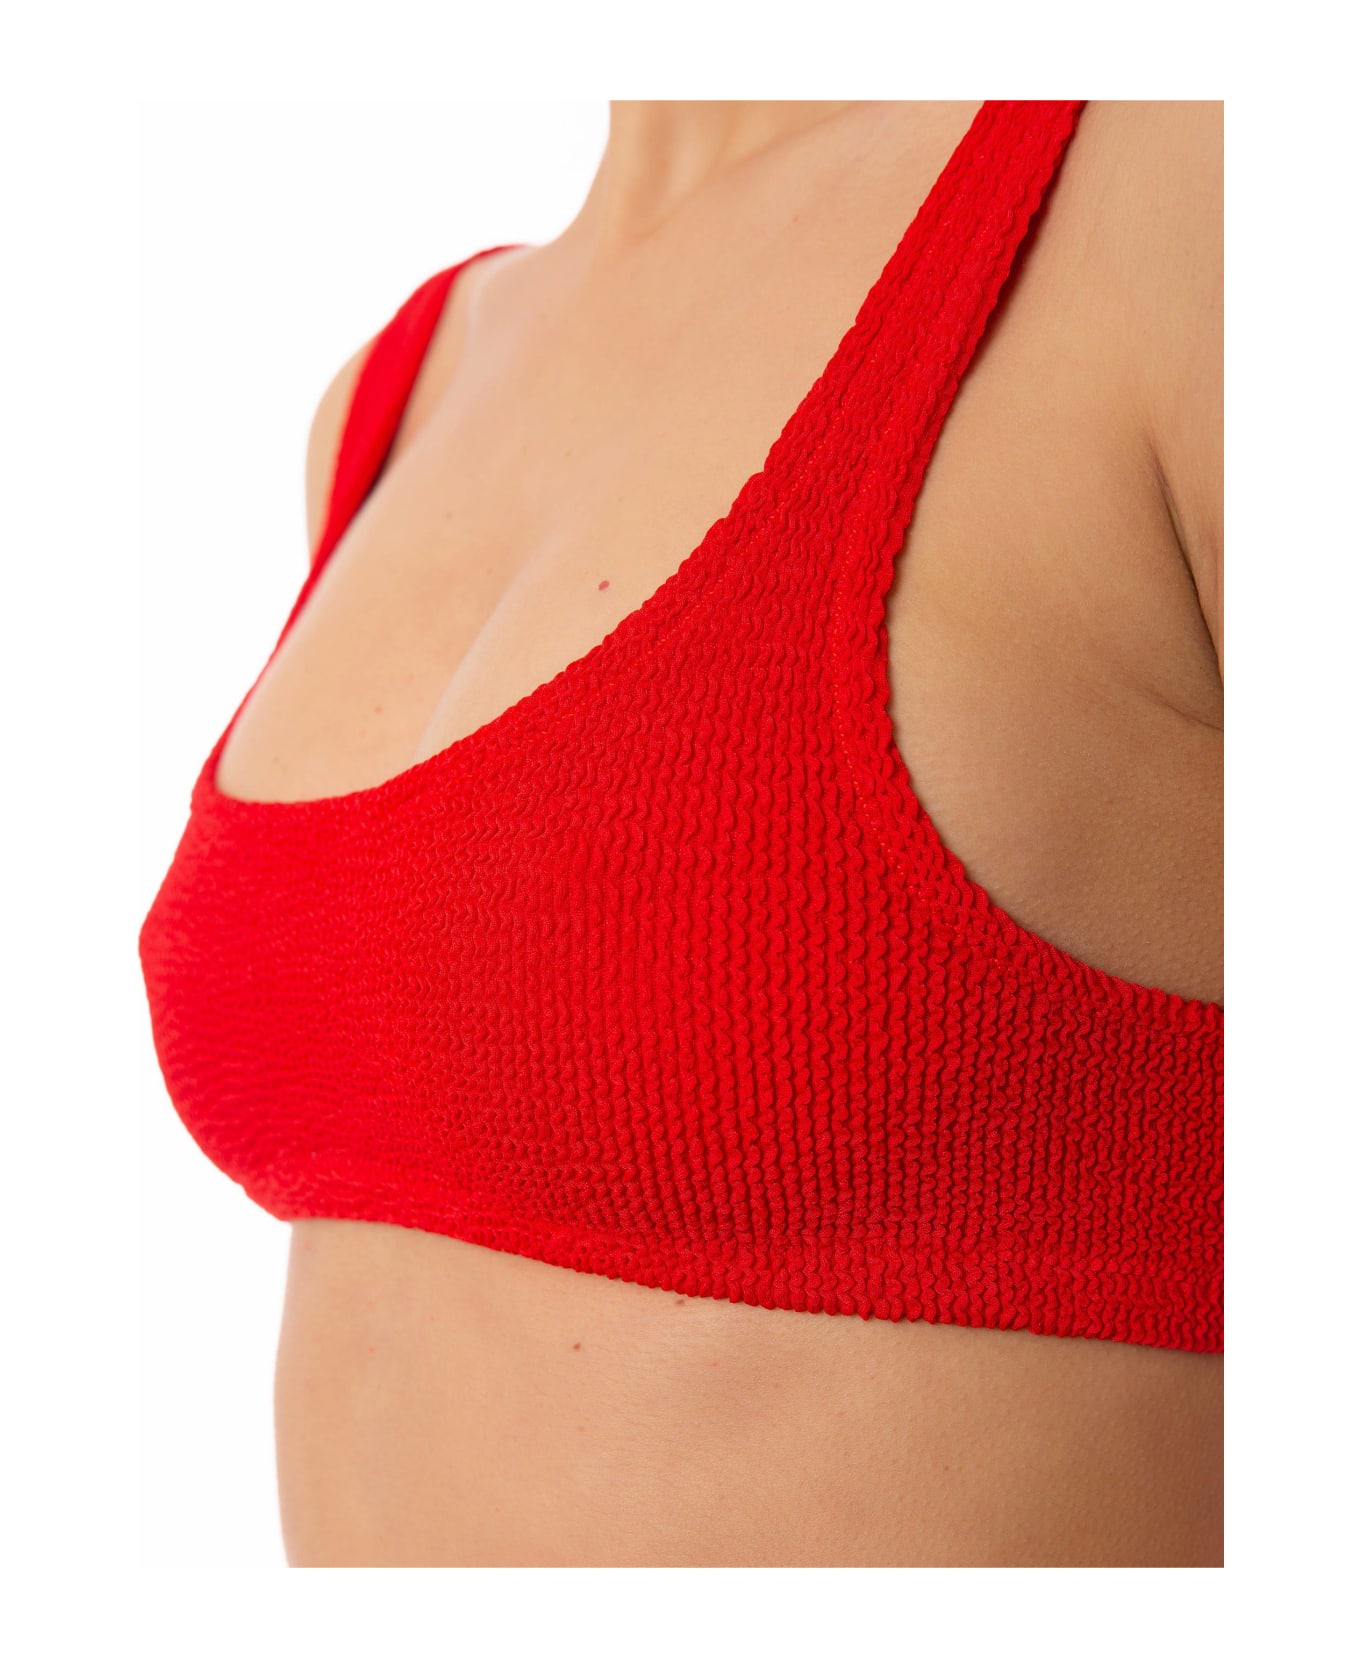 MC2 Saint Barth Woman Red Crinkle Bralette Top Swimsuit - RED 水着